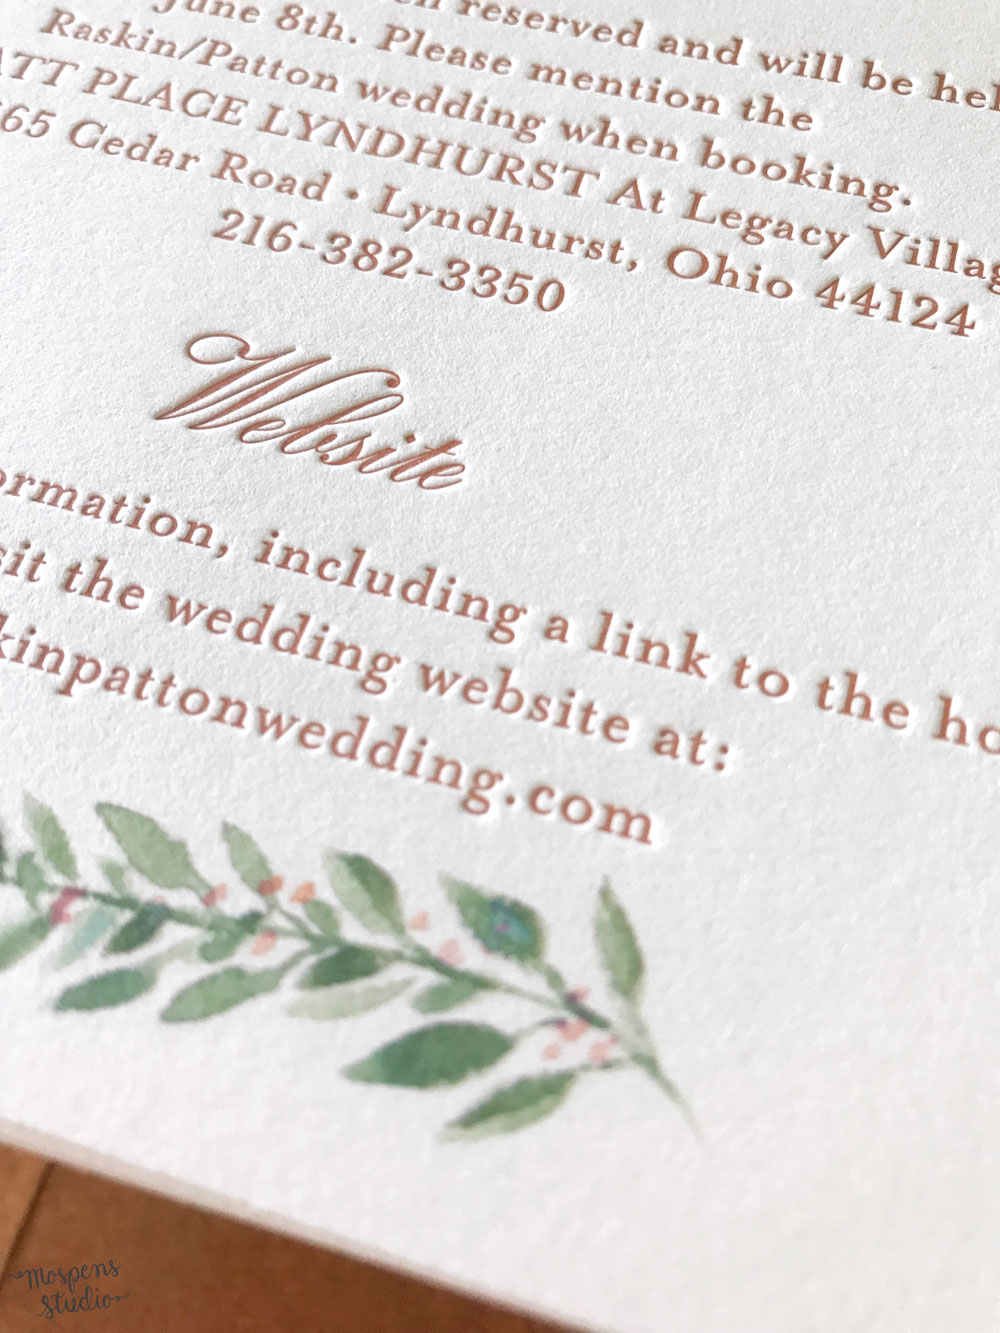 Gorgeous painted peach flowers and copper accents created an elegant floral wedding invitation for a summer wedding. 100% original art by Michelle Mospens. Luxe letterpress printing. Mospens Studio